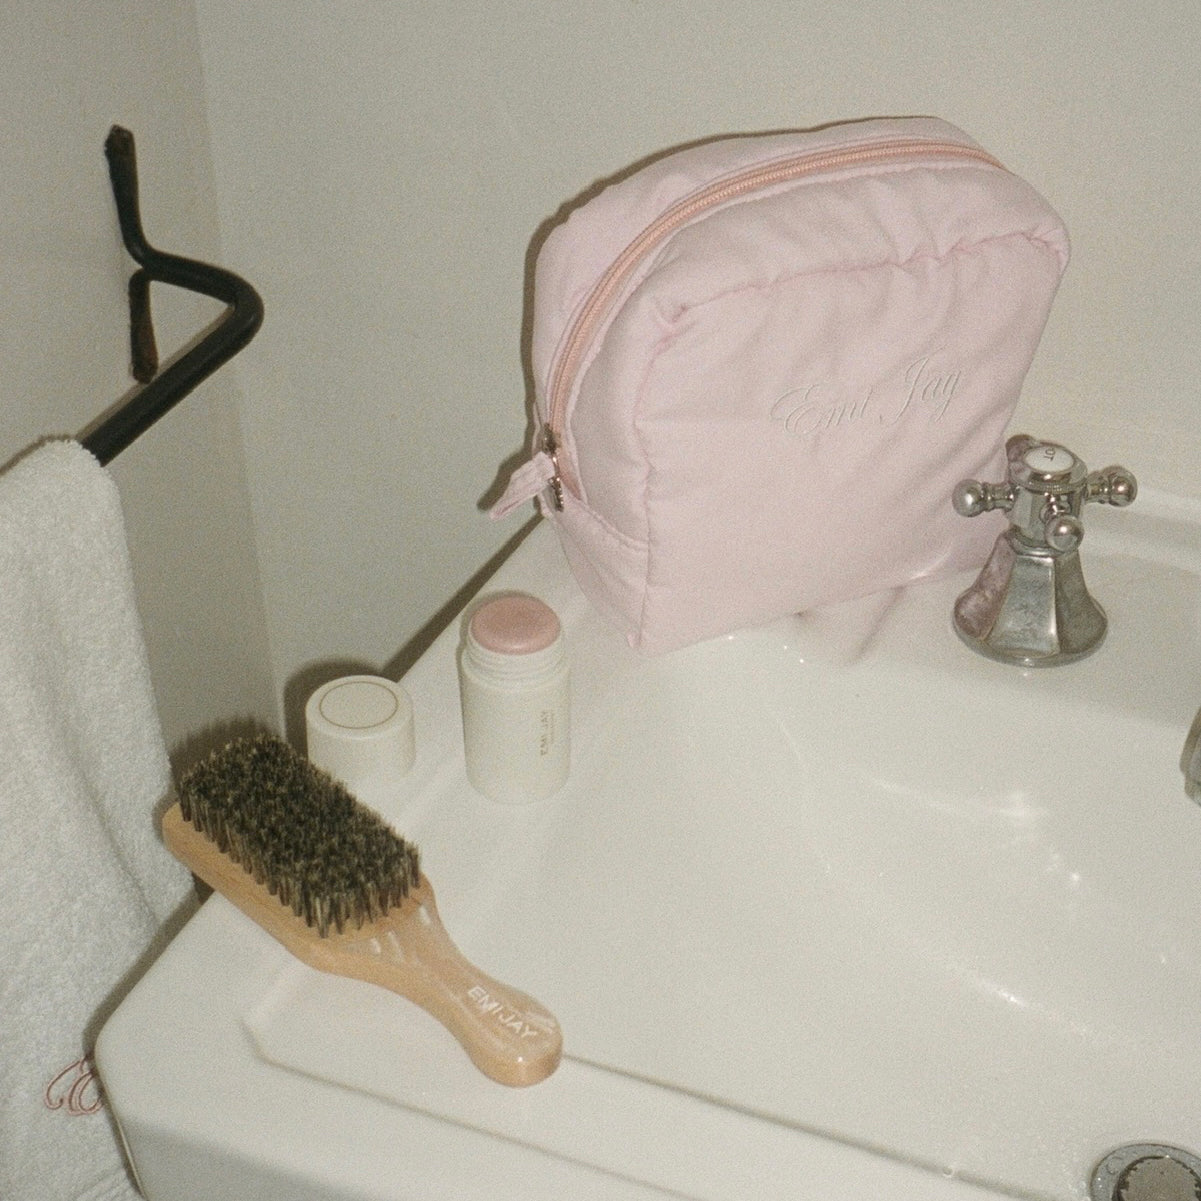 Angel Pouch in Rose Milk on bathroom sink next to mini boar brush in leche and angelstick